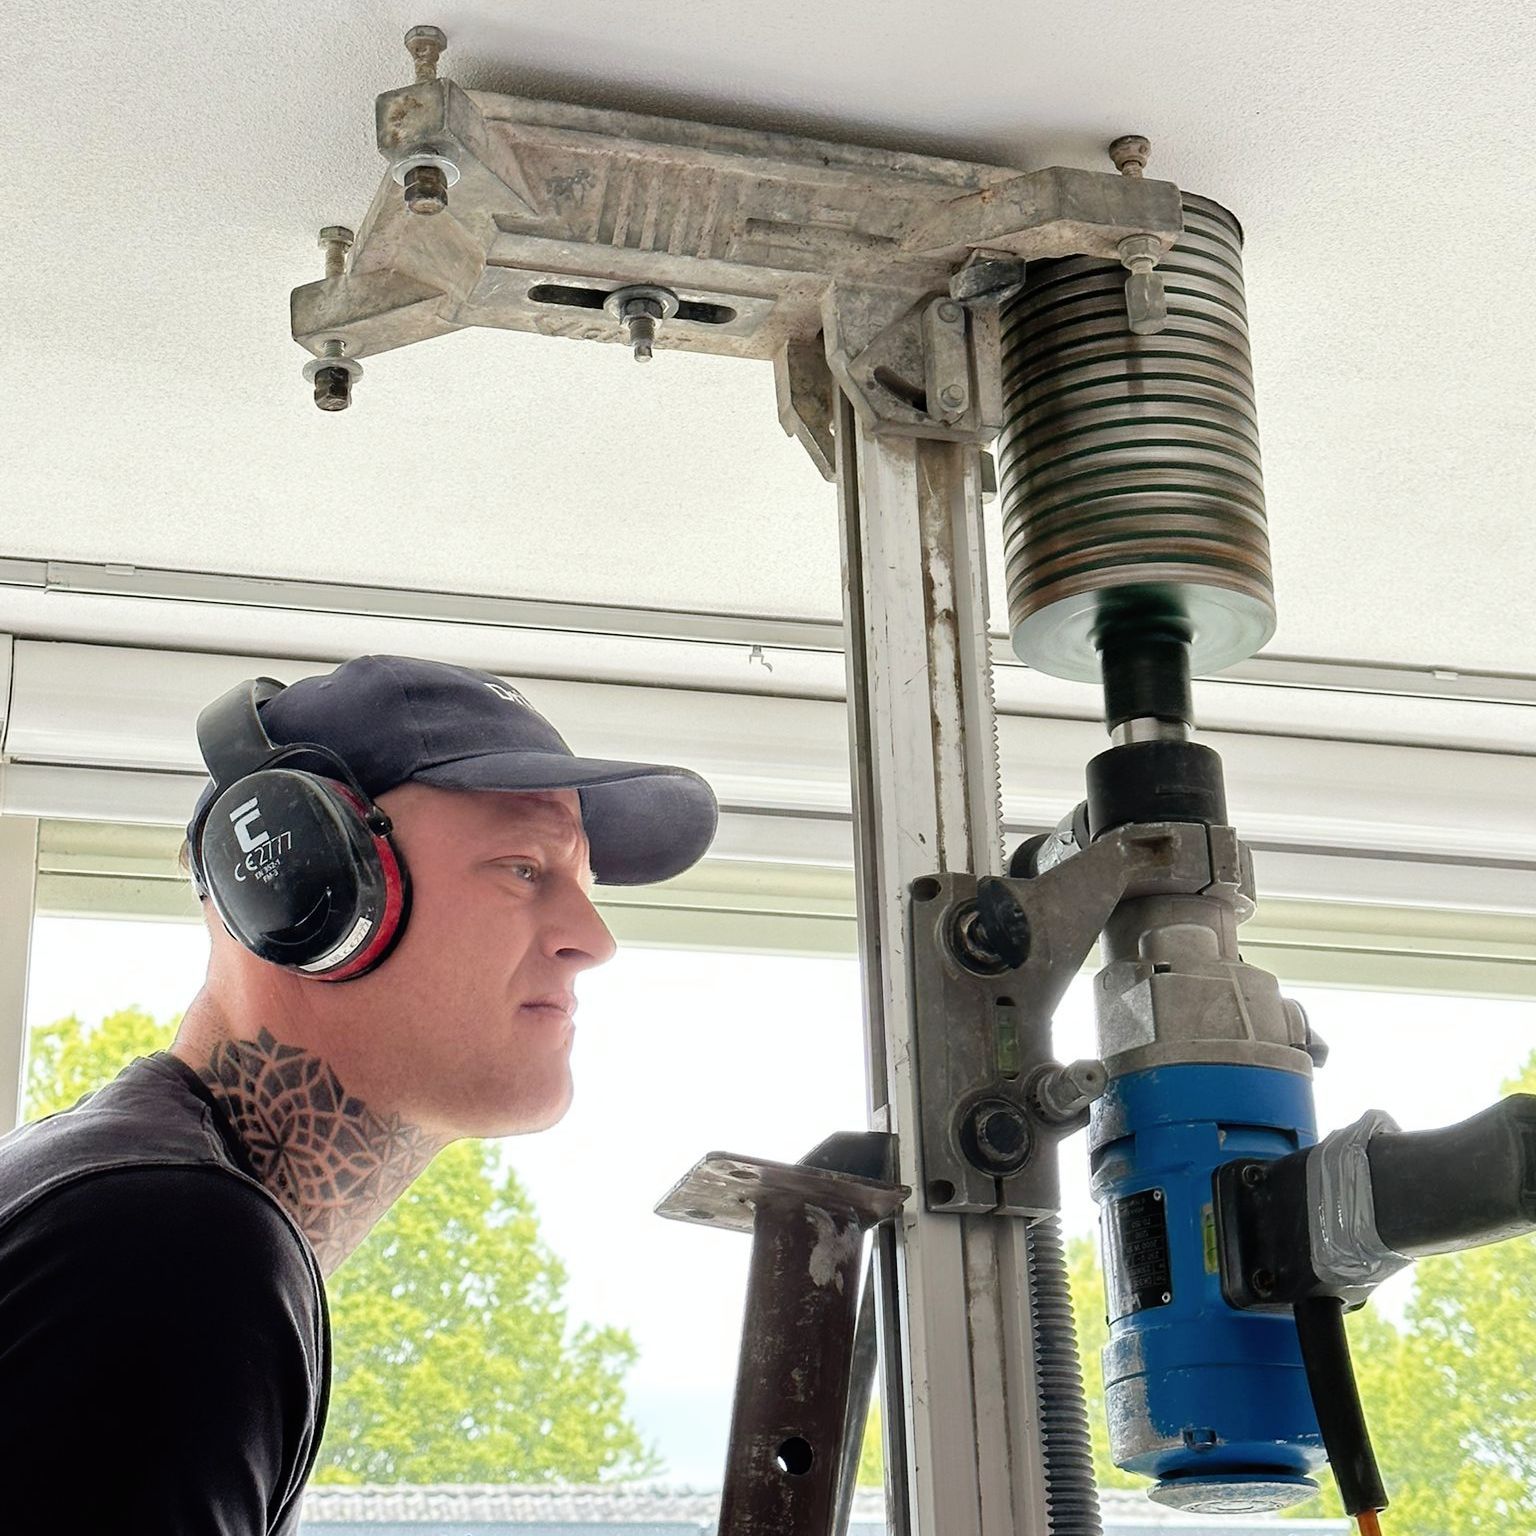 A man wearing headphones is working on a drilling machine